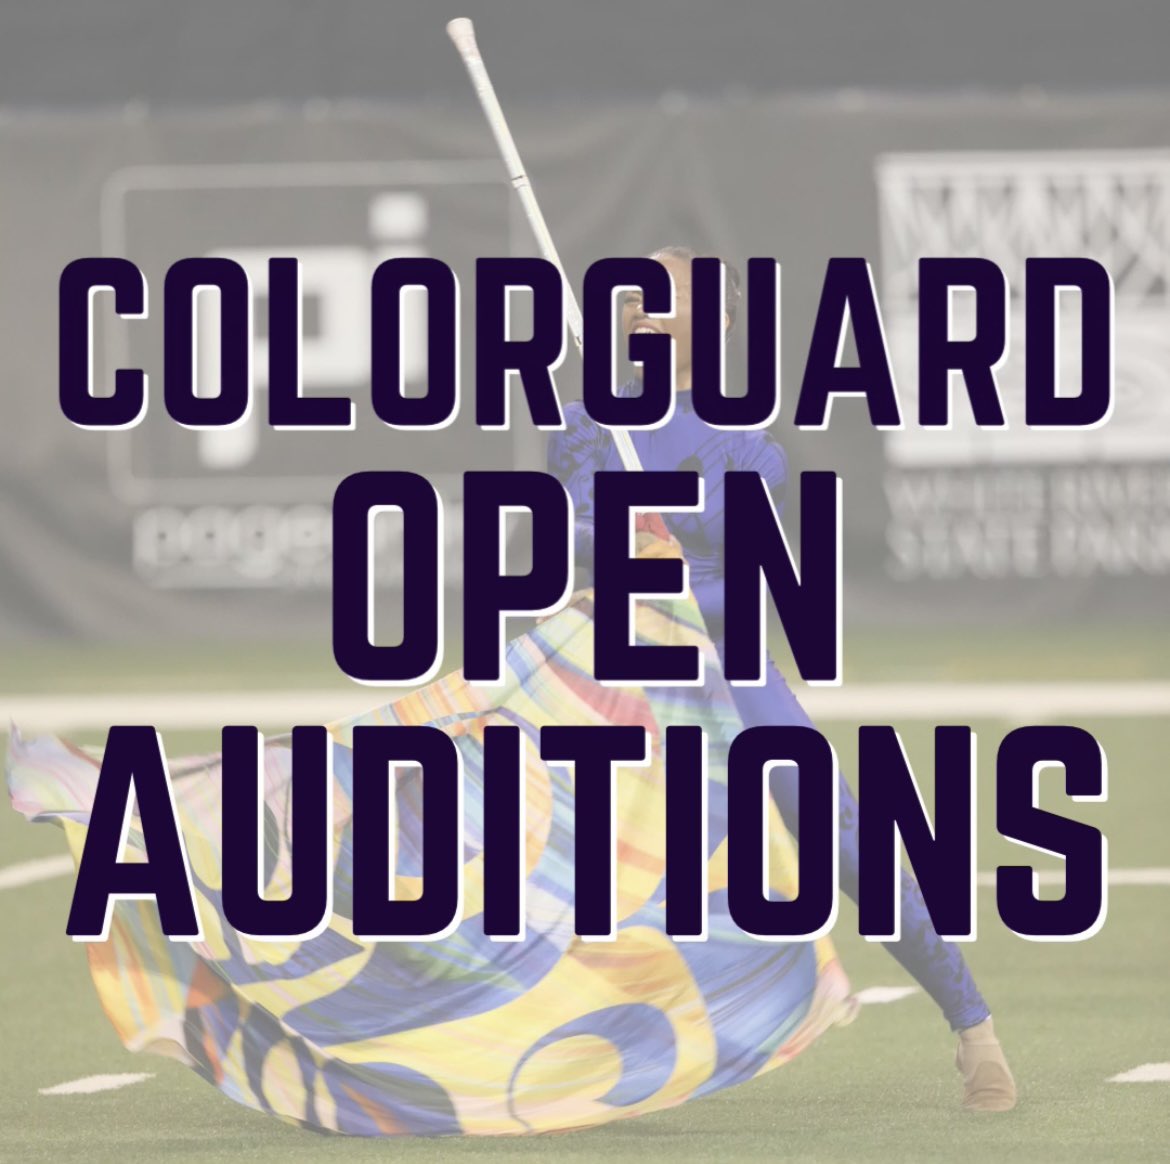 Still looking for a drum corps home this summer? There is still time to join our #FenixFam ! Open auditions will be held virtually, visit our website for more information ➡️ genesisdbc.org/2021/02/25/ope…